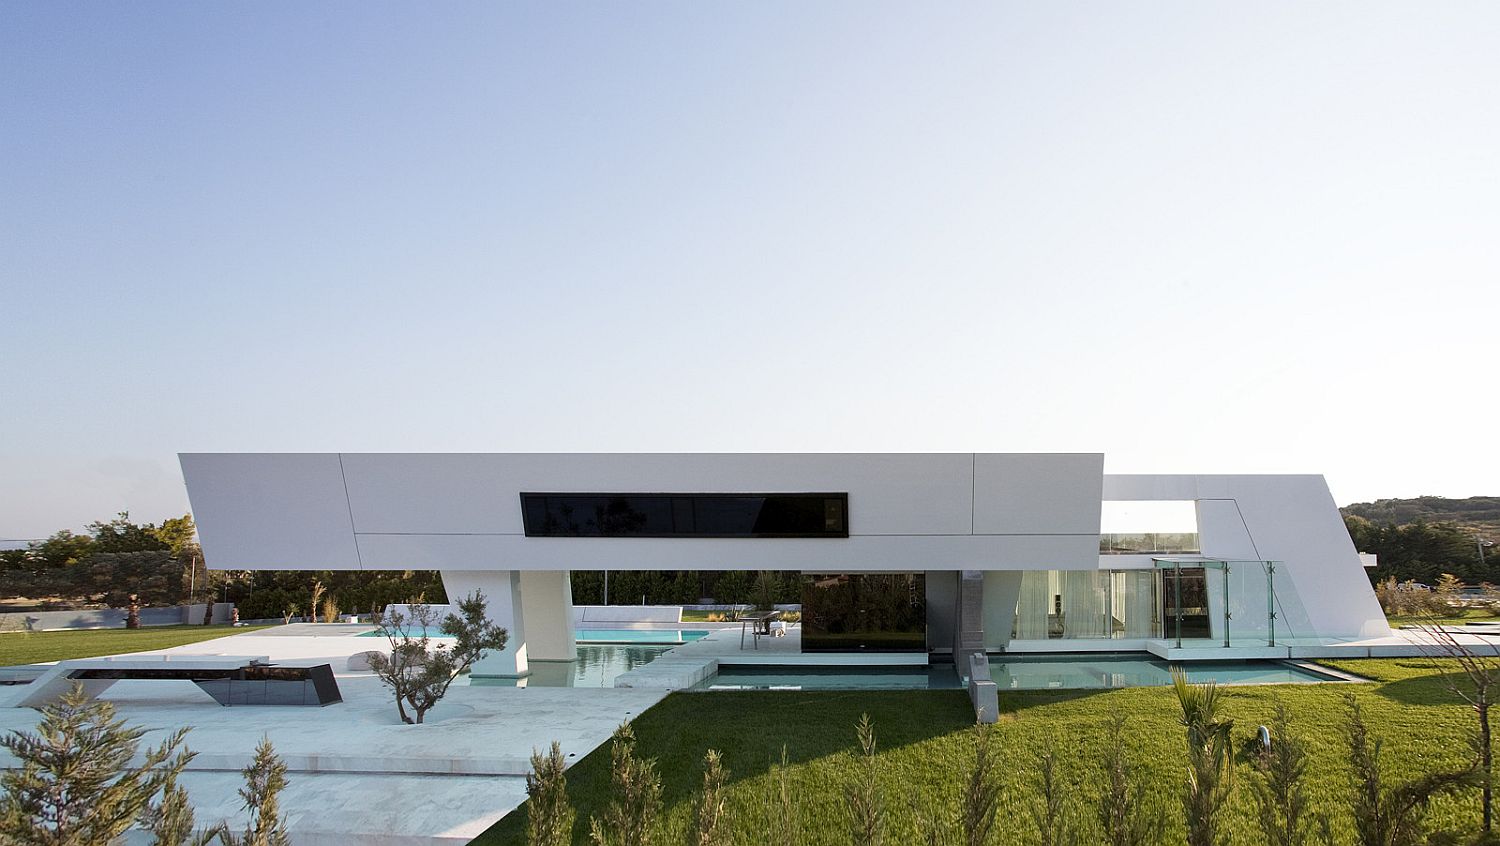 Polished-white-exterior-of-the-home-gives-it-a-contemporary-minimal-appeal